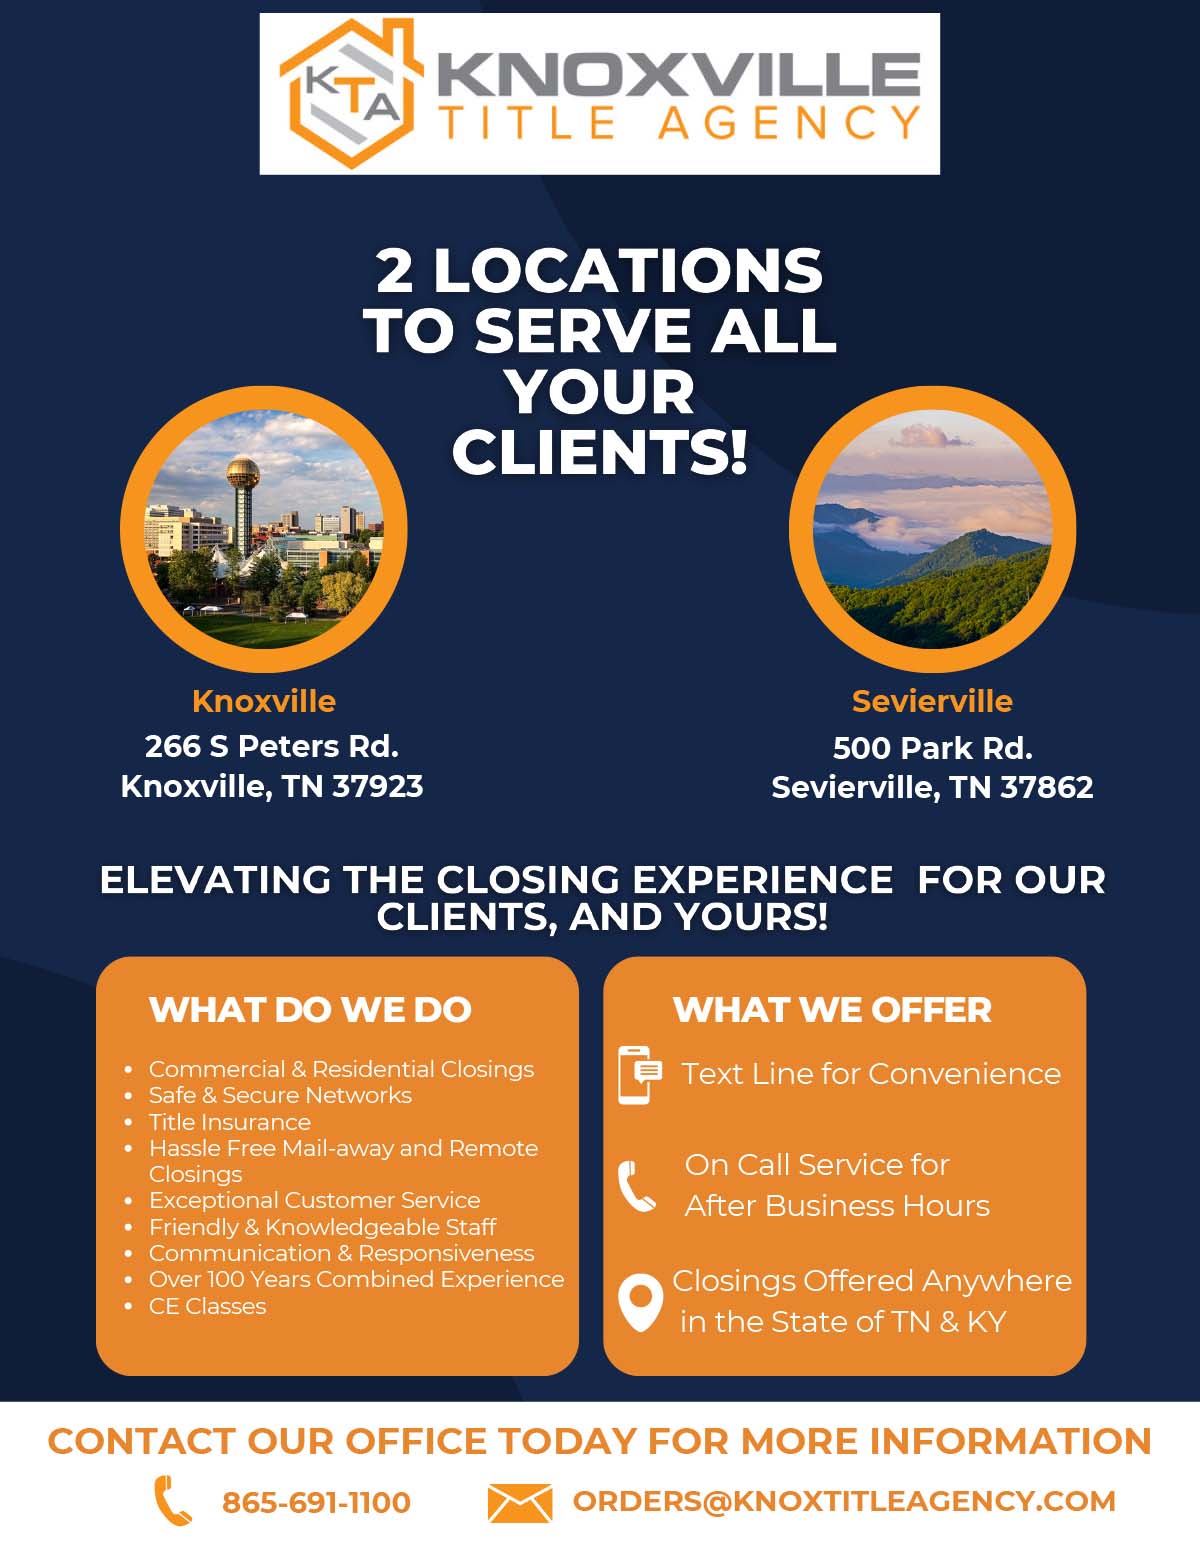 2 Locations to Serve all your clients